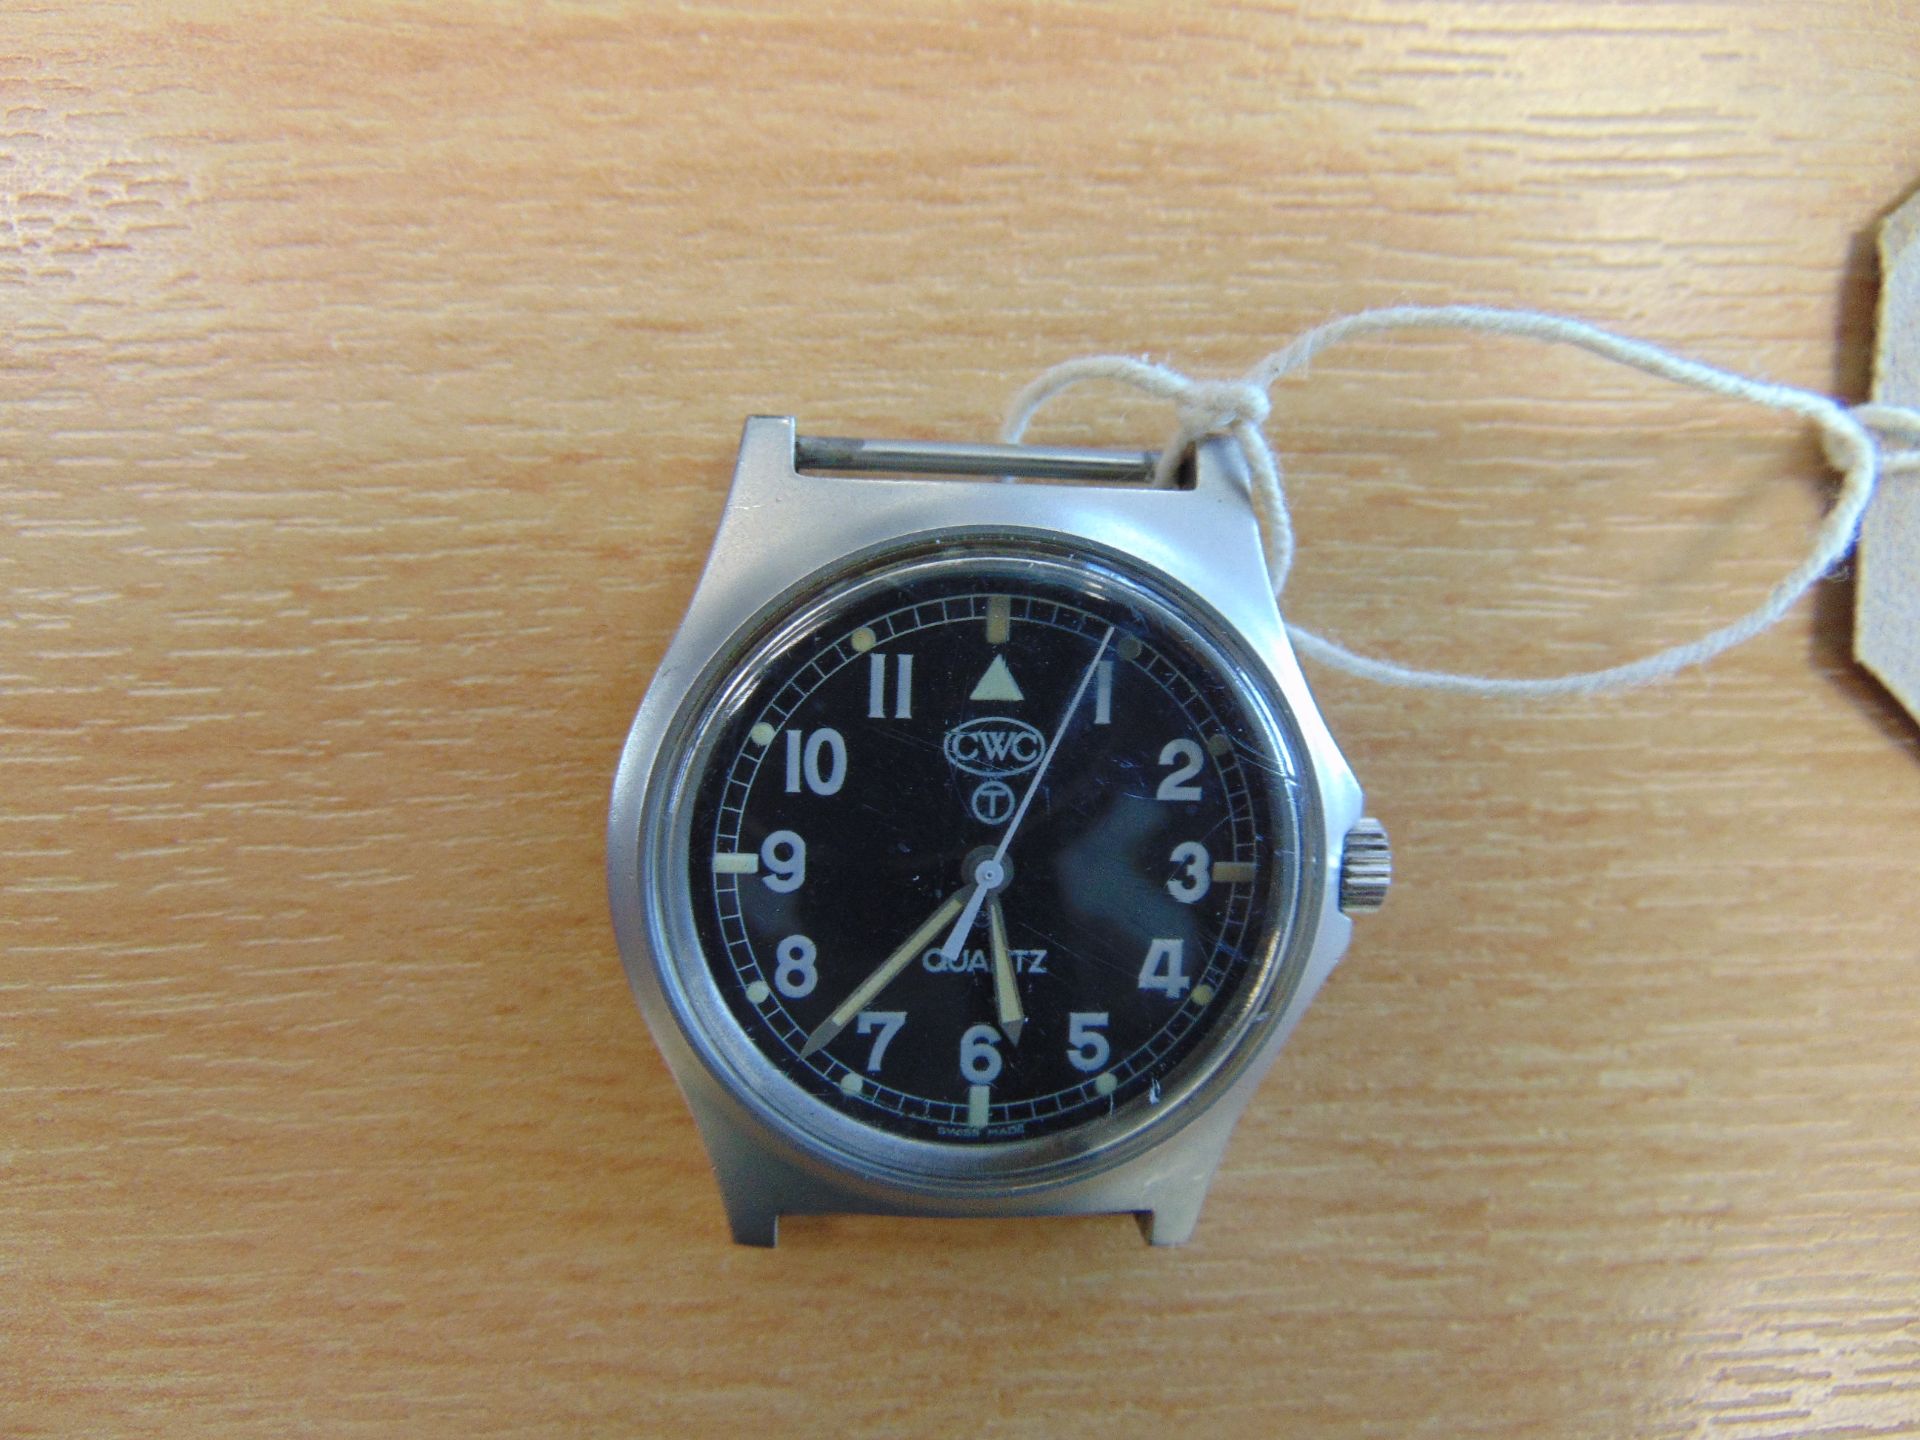 CWC 0552 Royal Marine / Navy Issue Service Watch Nato Marks, Date 1989 - Image 2 of 4